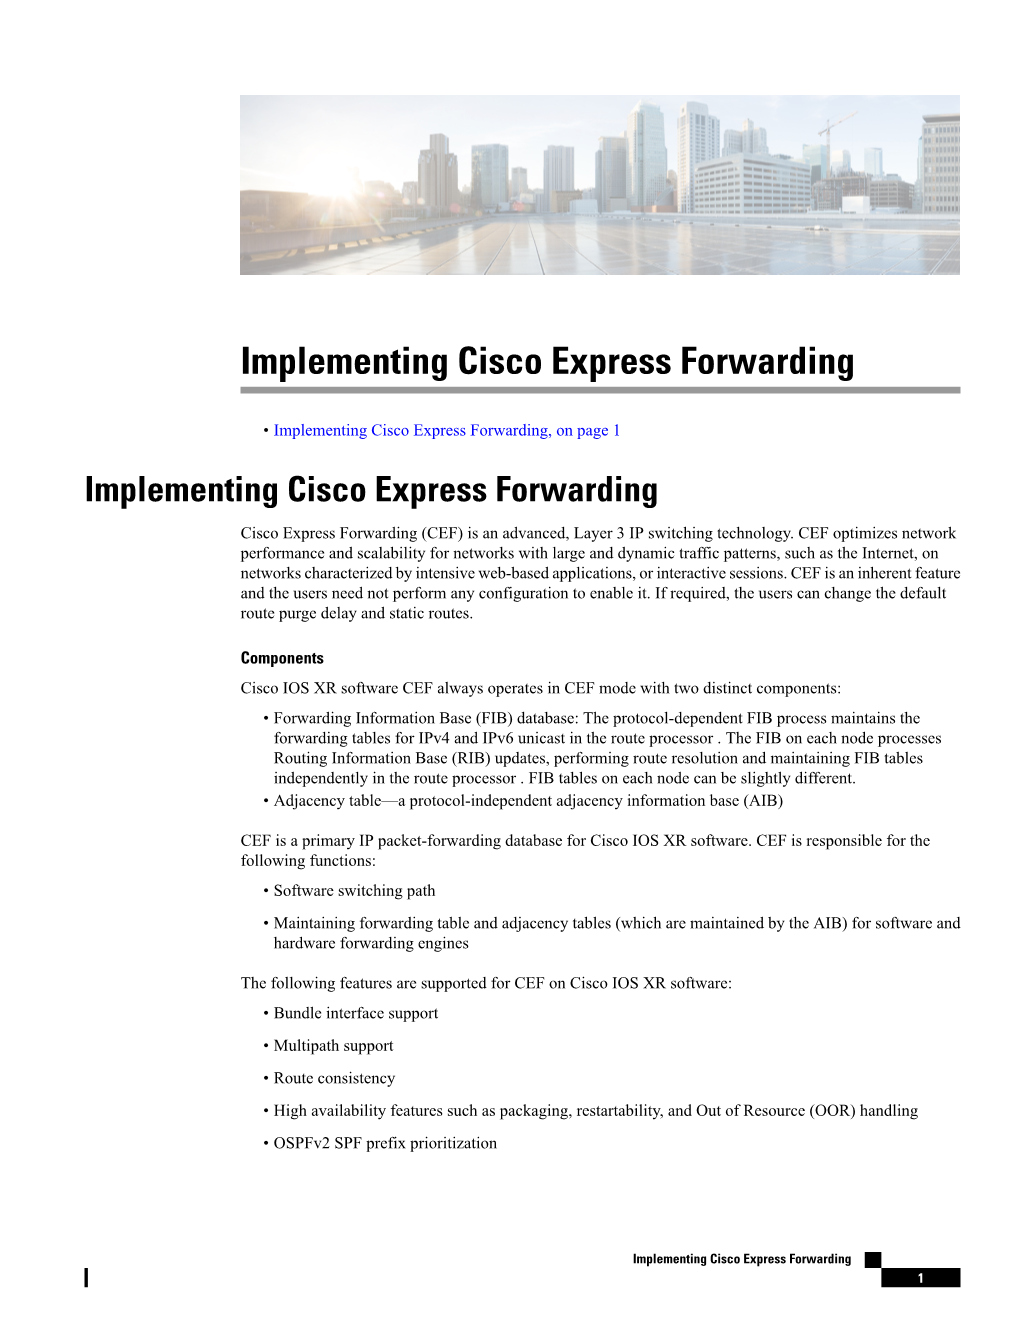 Implementing Cisco Express Forwarding